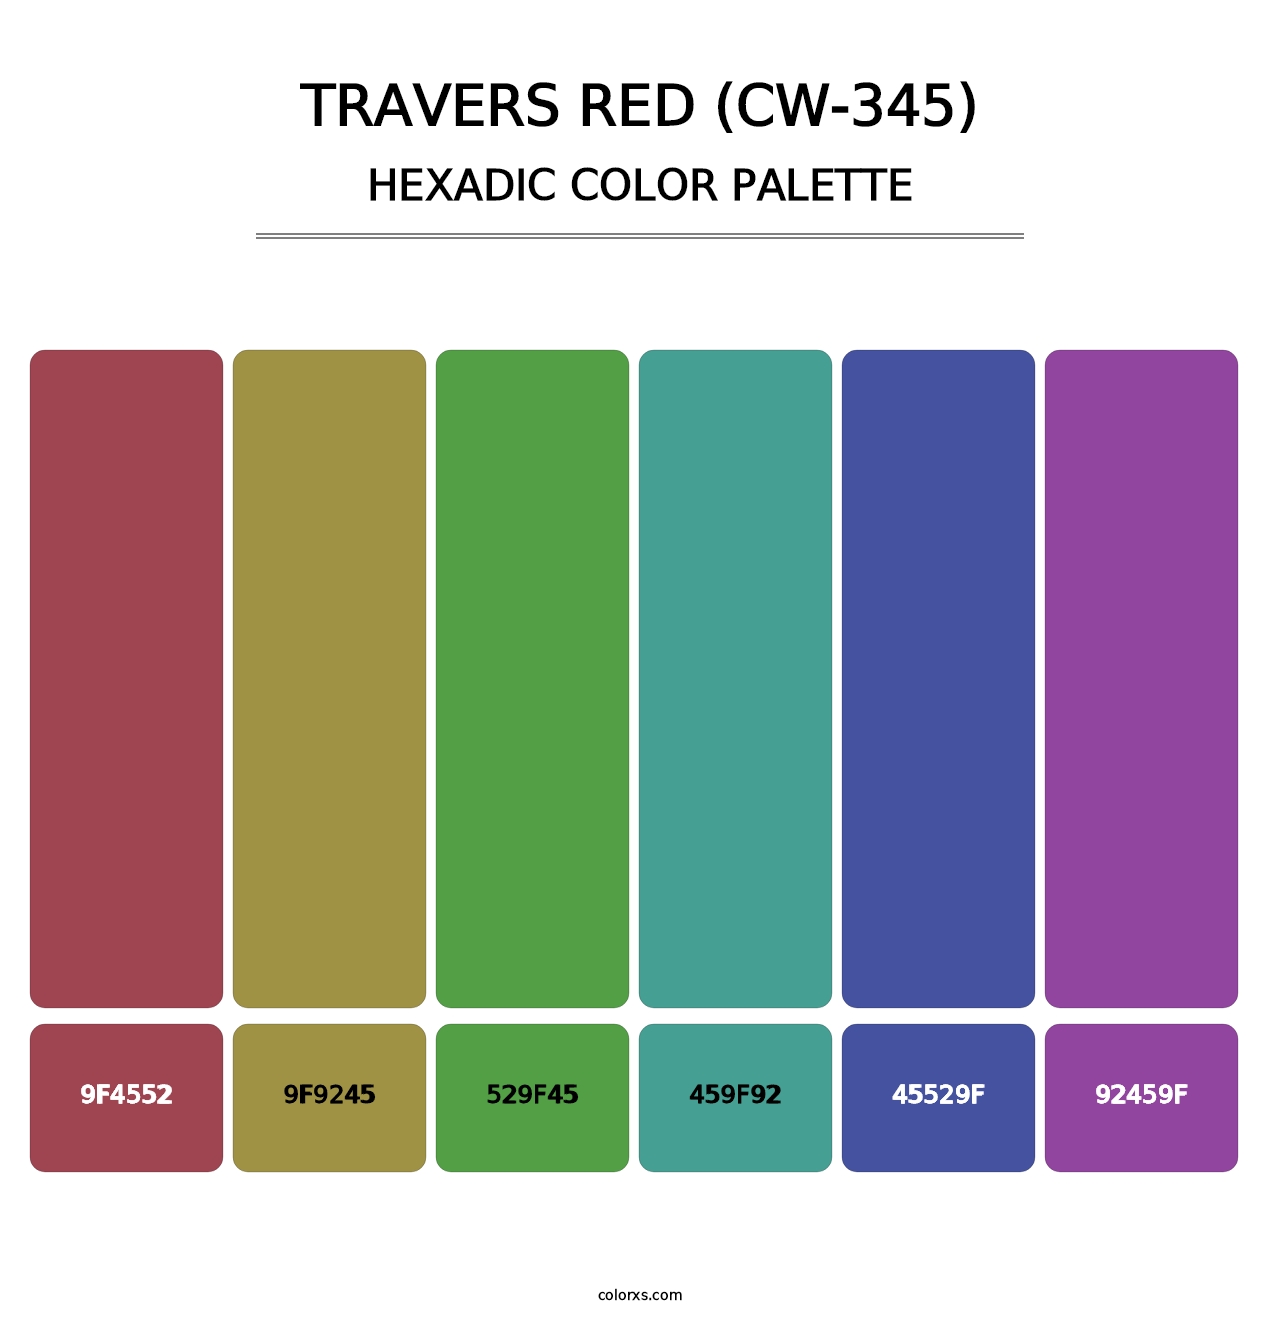 Travers Red (CW-345) - Hexadic Color Palette